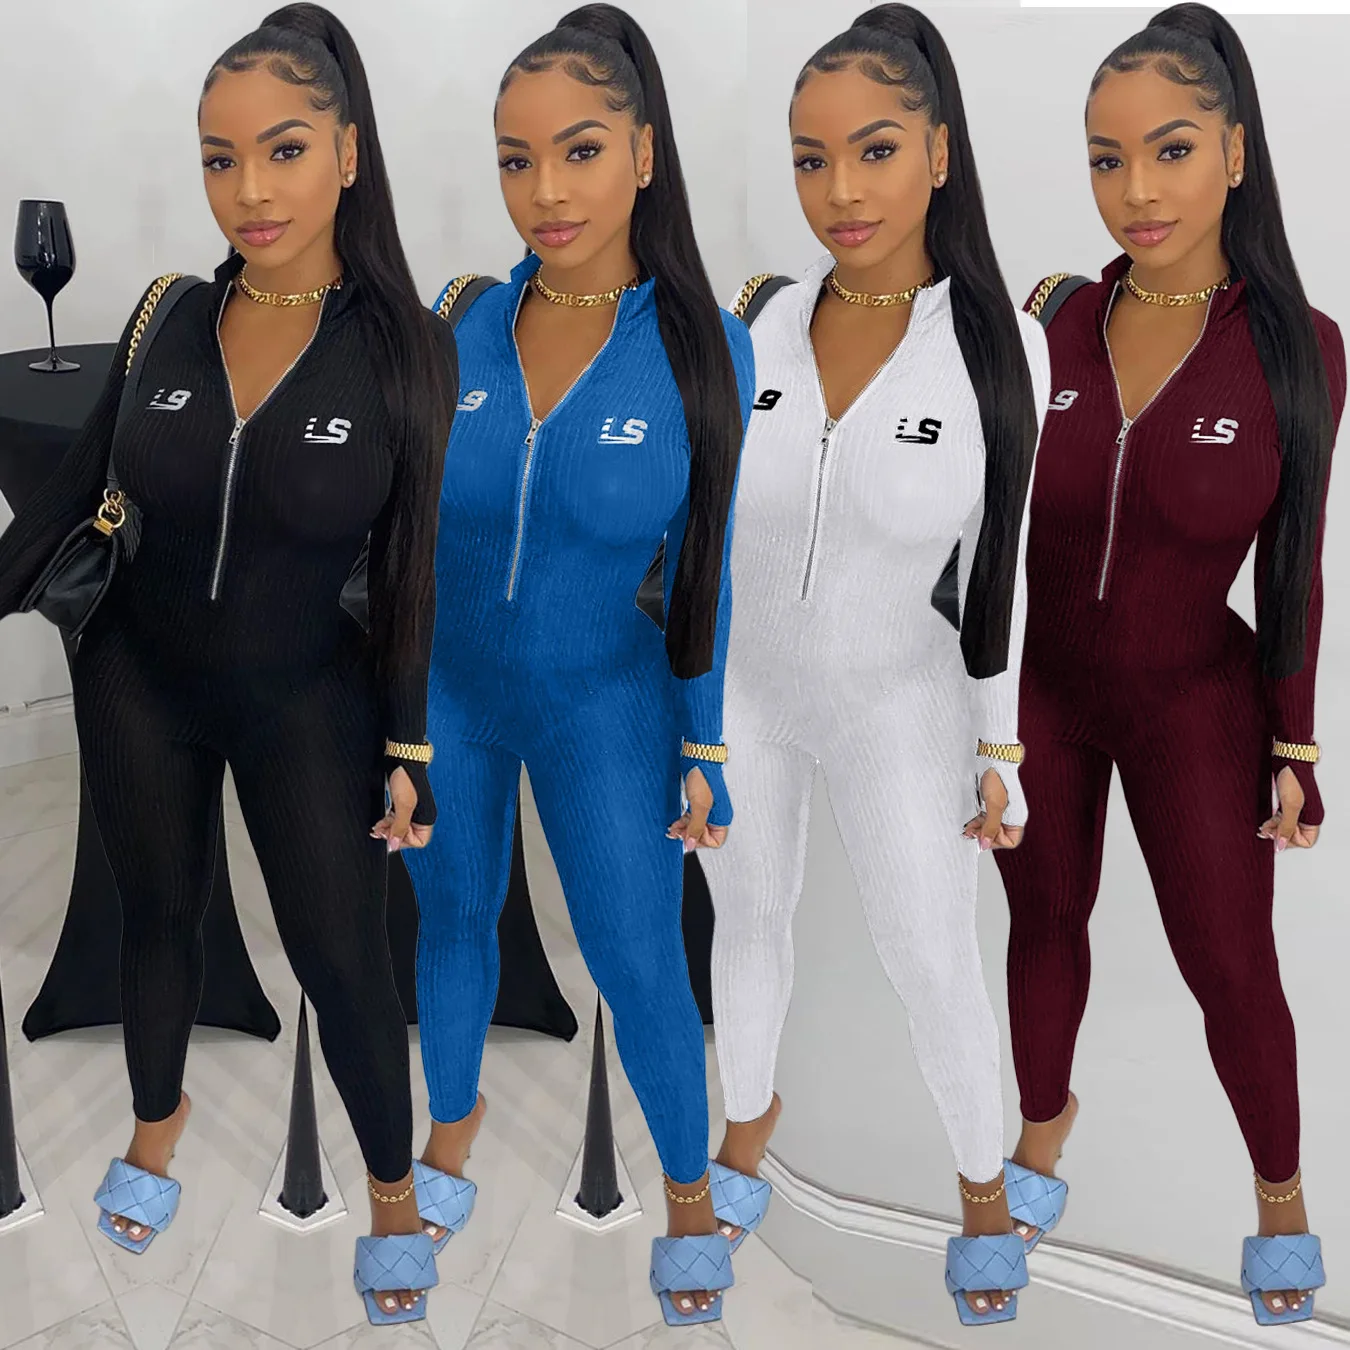 

CL-134 Casual Clothing Hoodie Fitness 2021 Jumpsuit Zipper Embroidery Long Sleeve Women Black Jumpsuit, As picture show